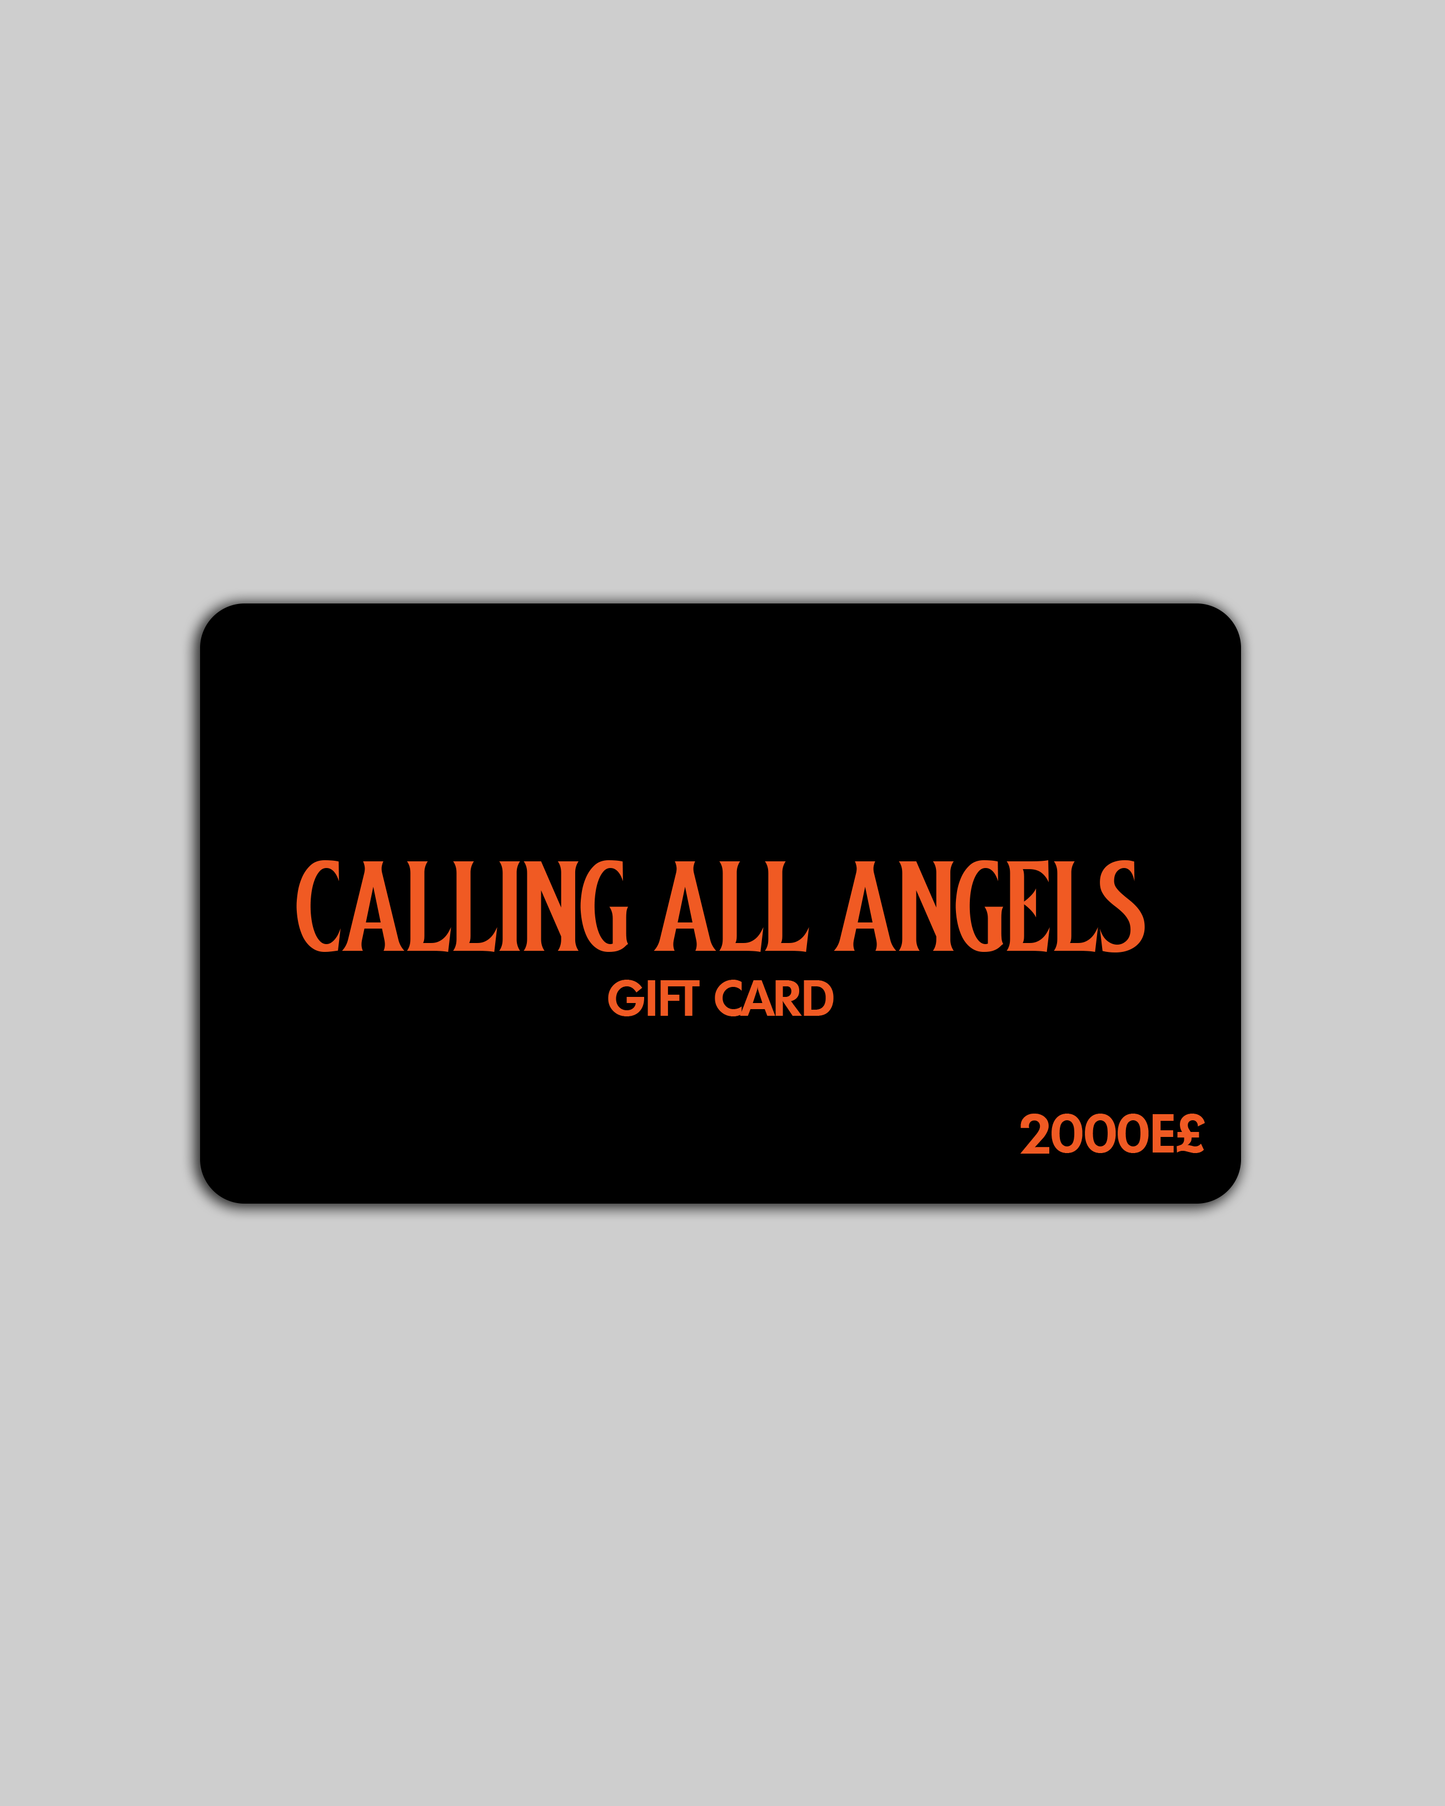 CALLING ALL ANGELS GIFT CARD